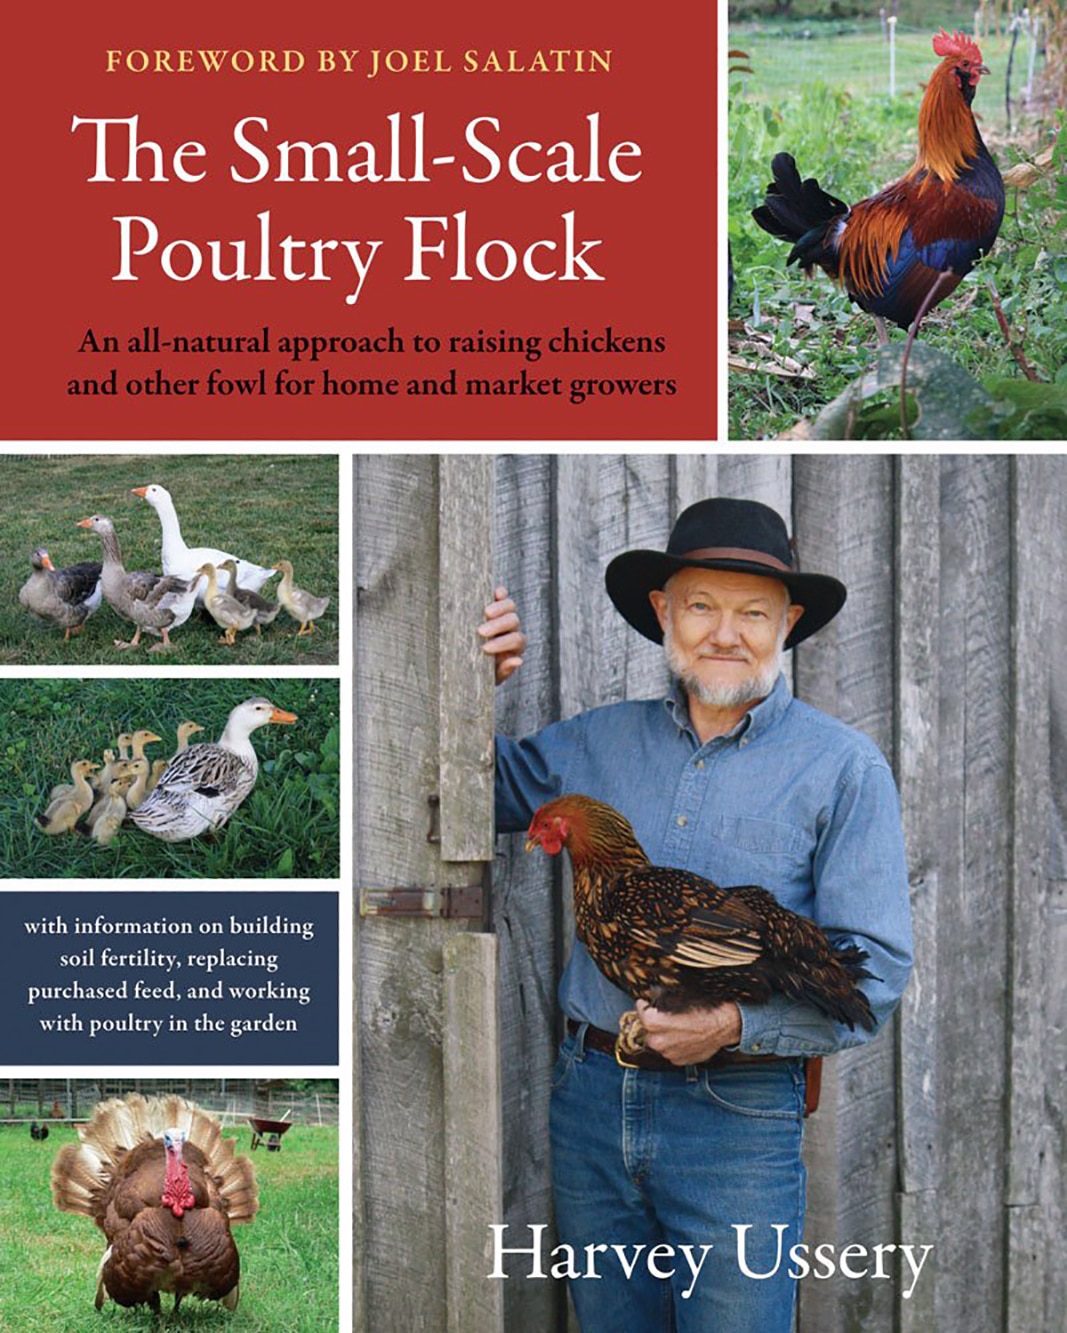 BOOK - Guide to Raising Poultry